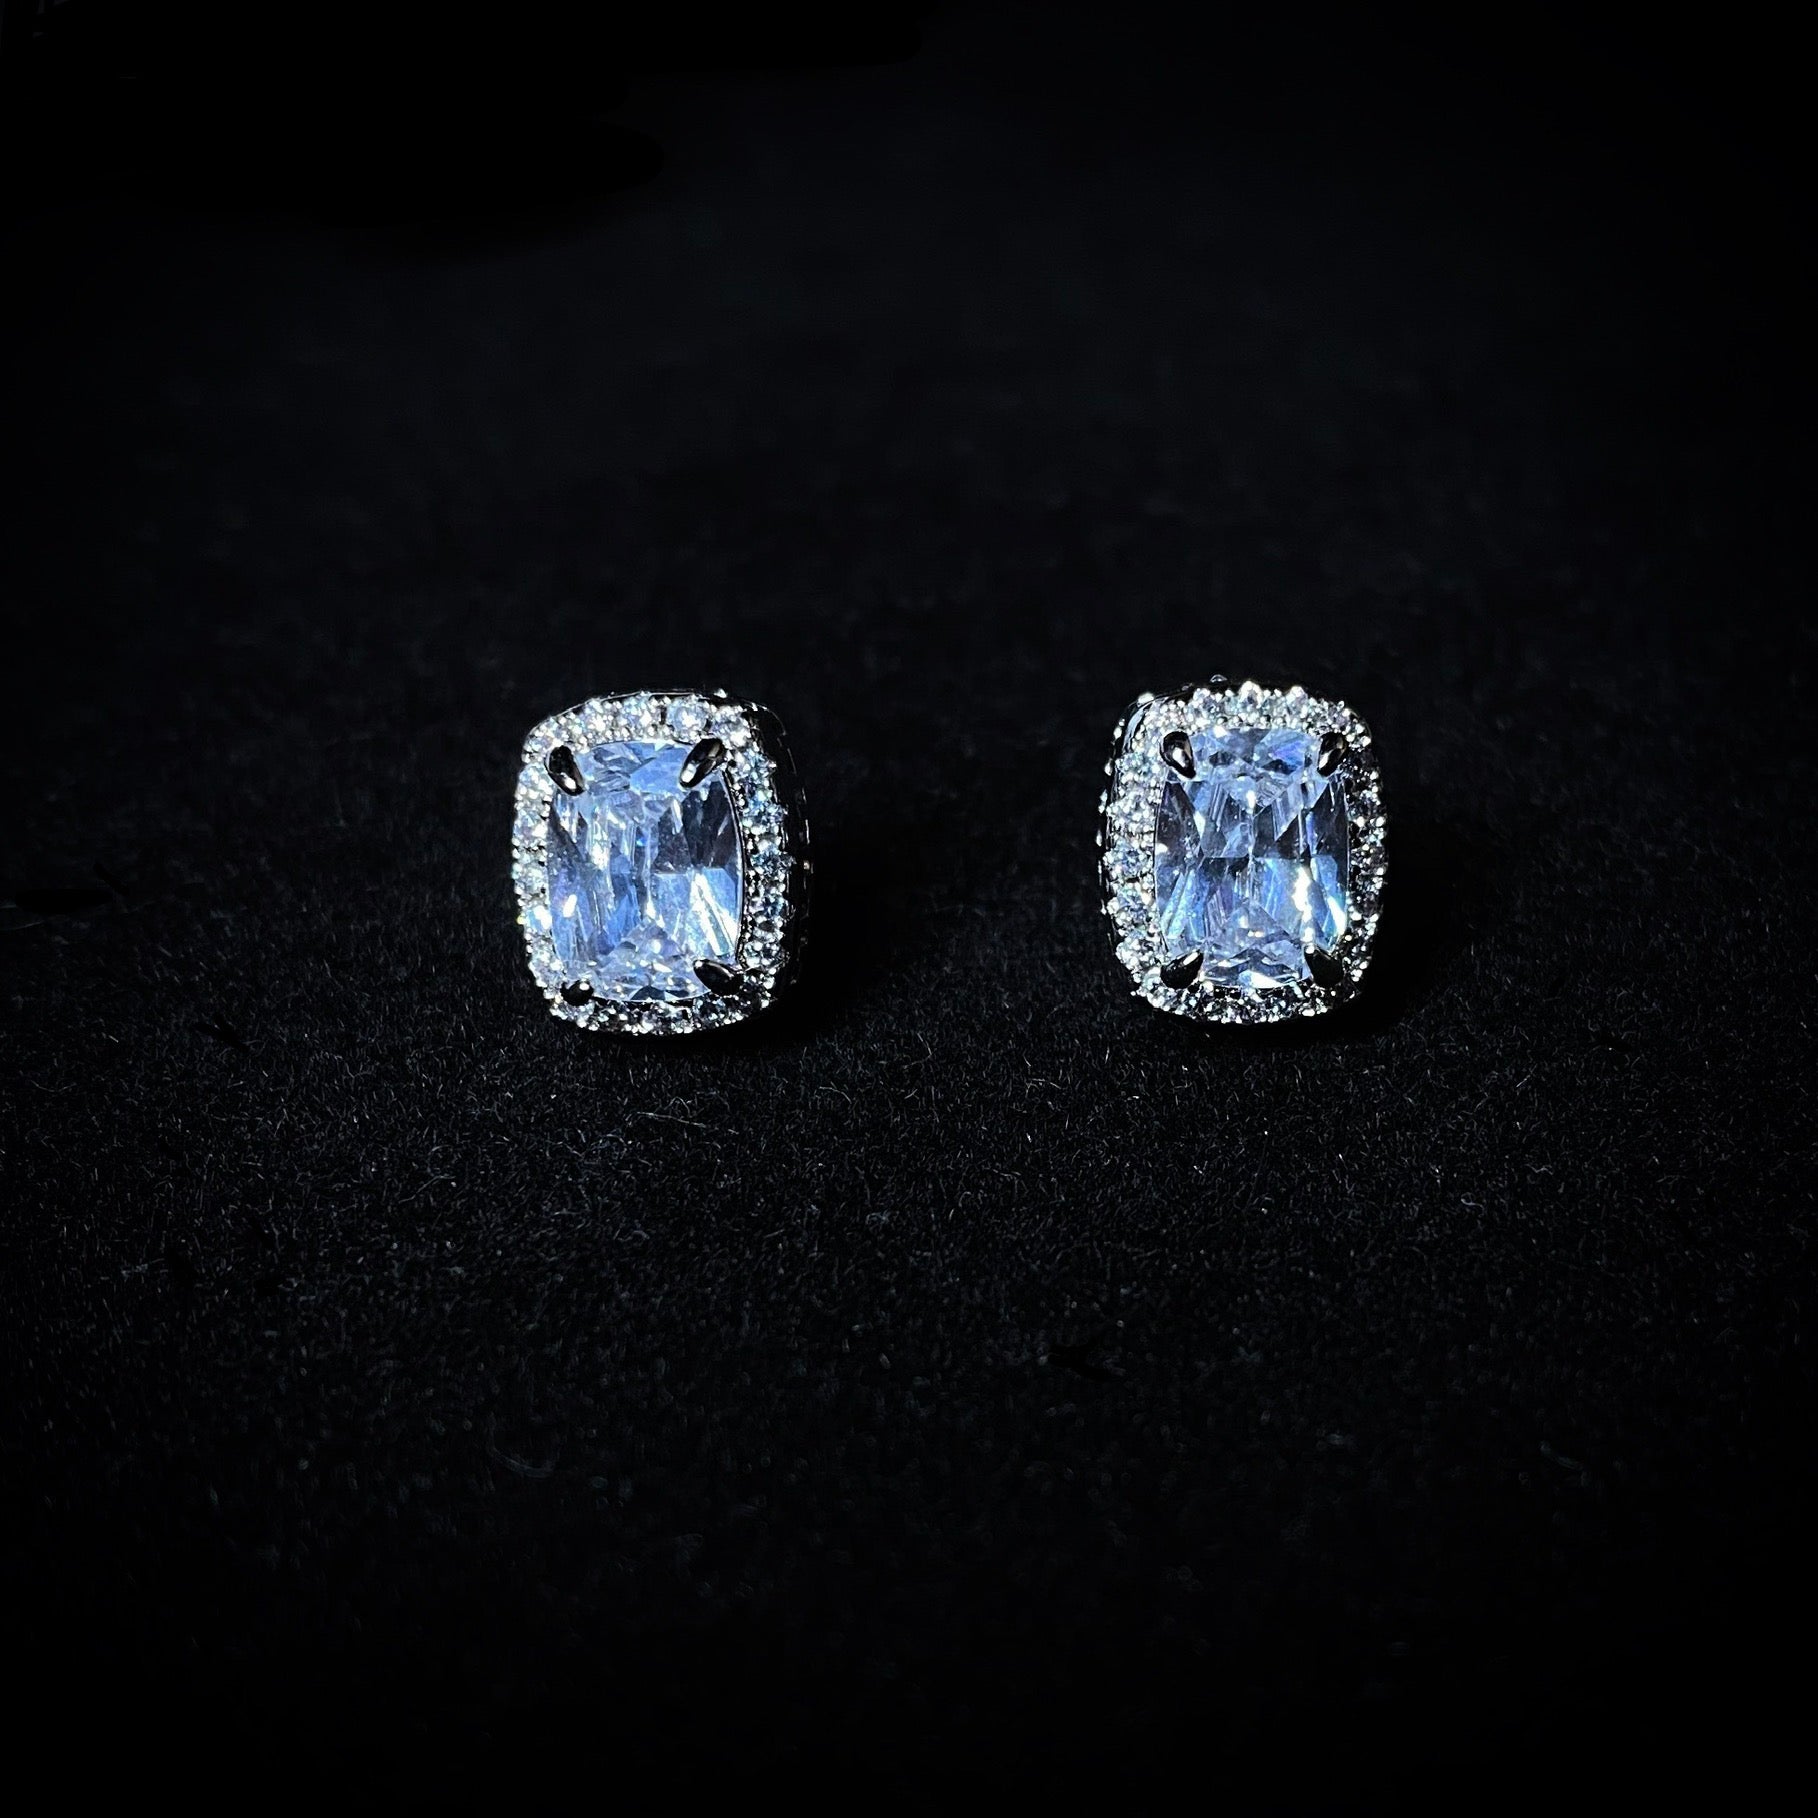 Iced Clear Square Stud Earrings - Pair